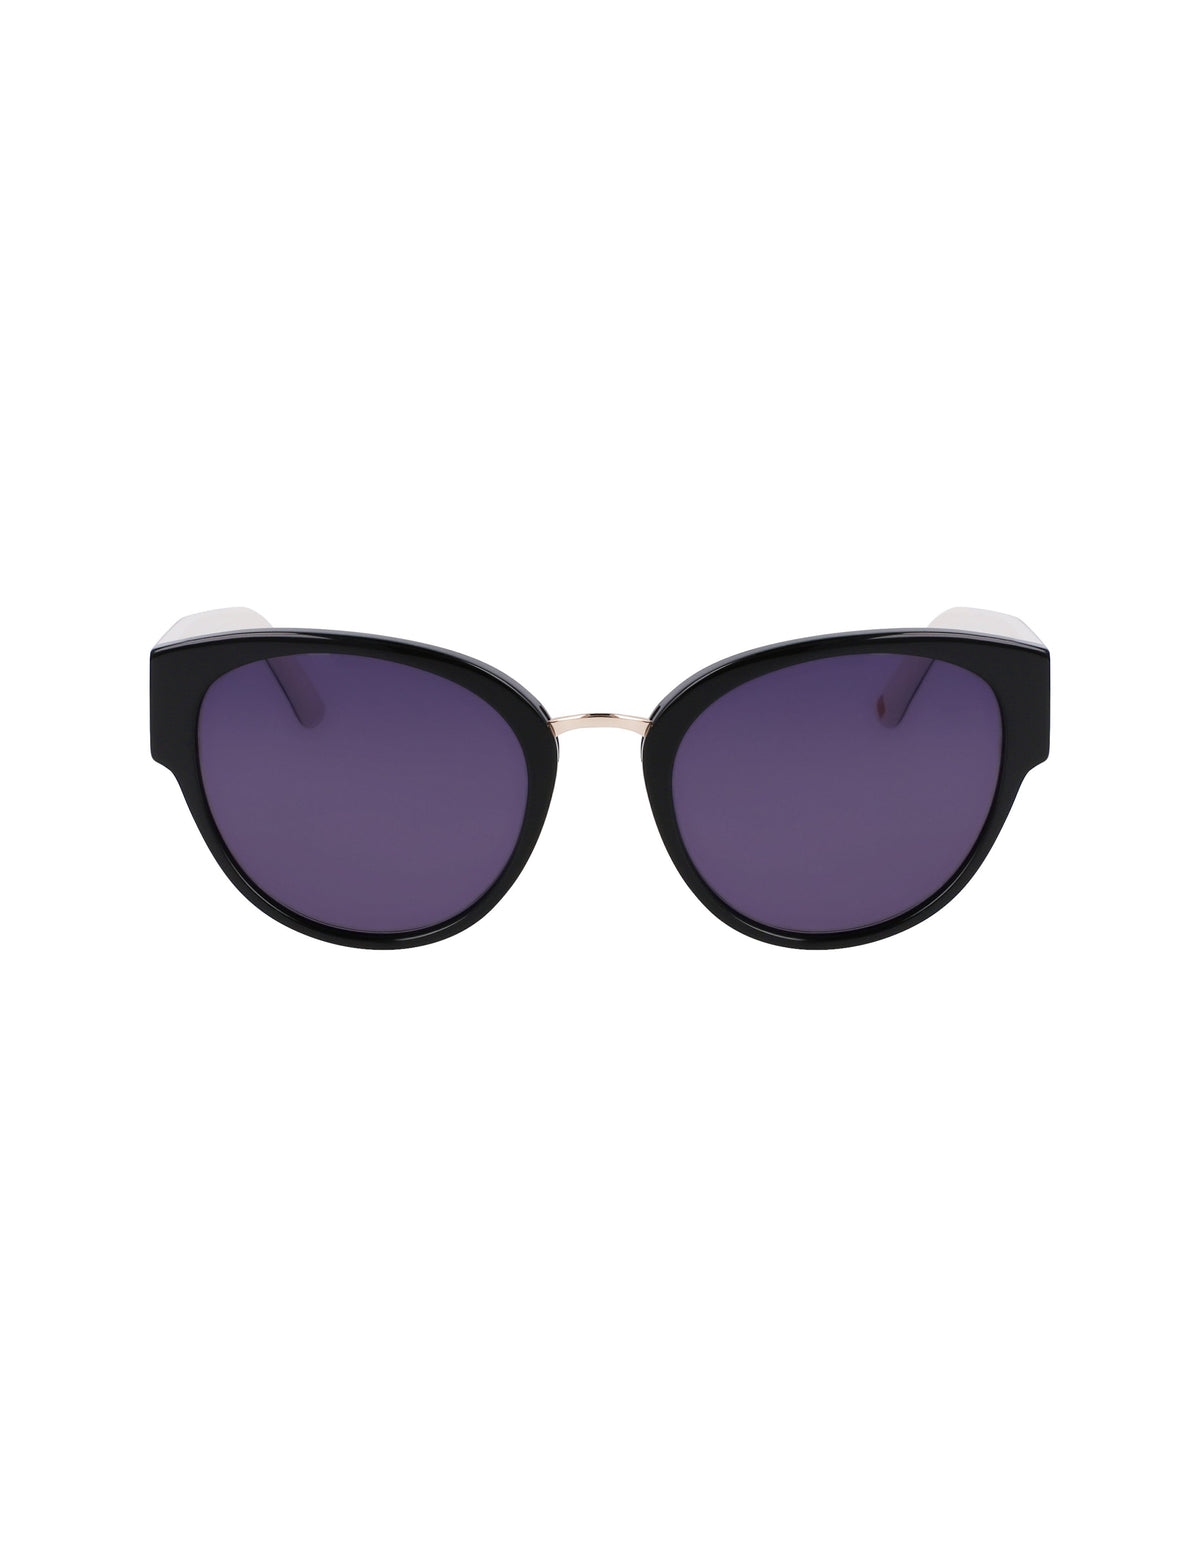 Anne Klein Black Chic Rounded Cat-Eye Sunglasses